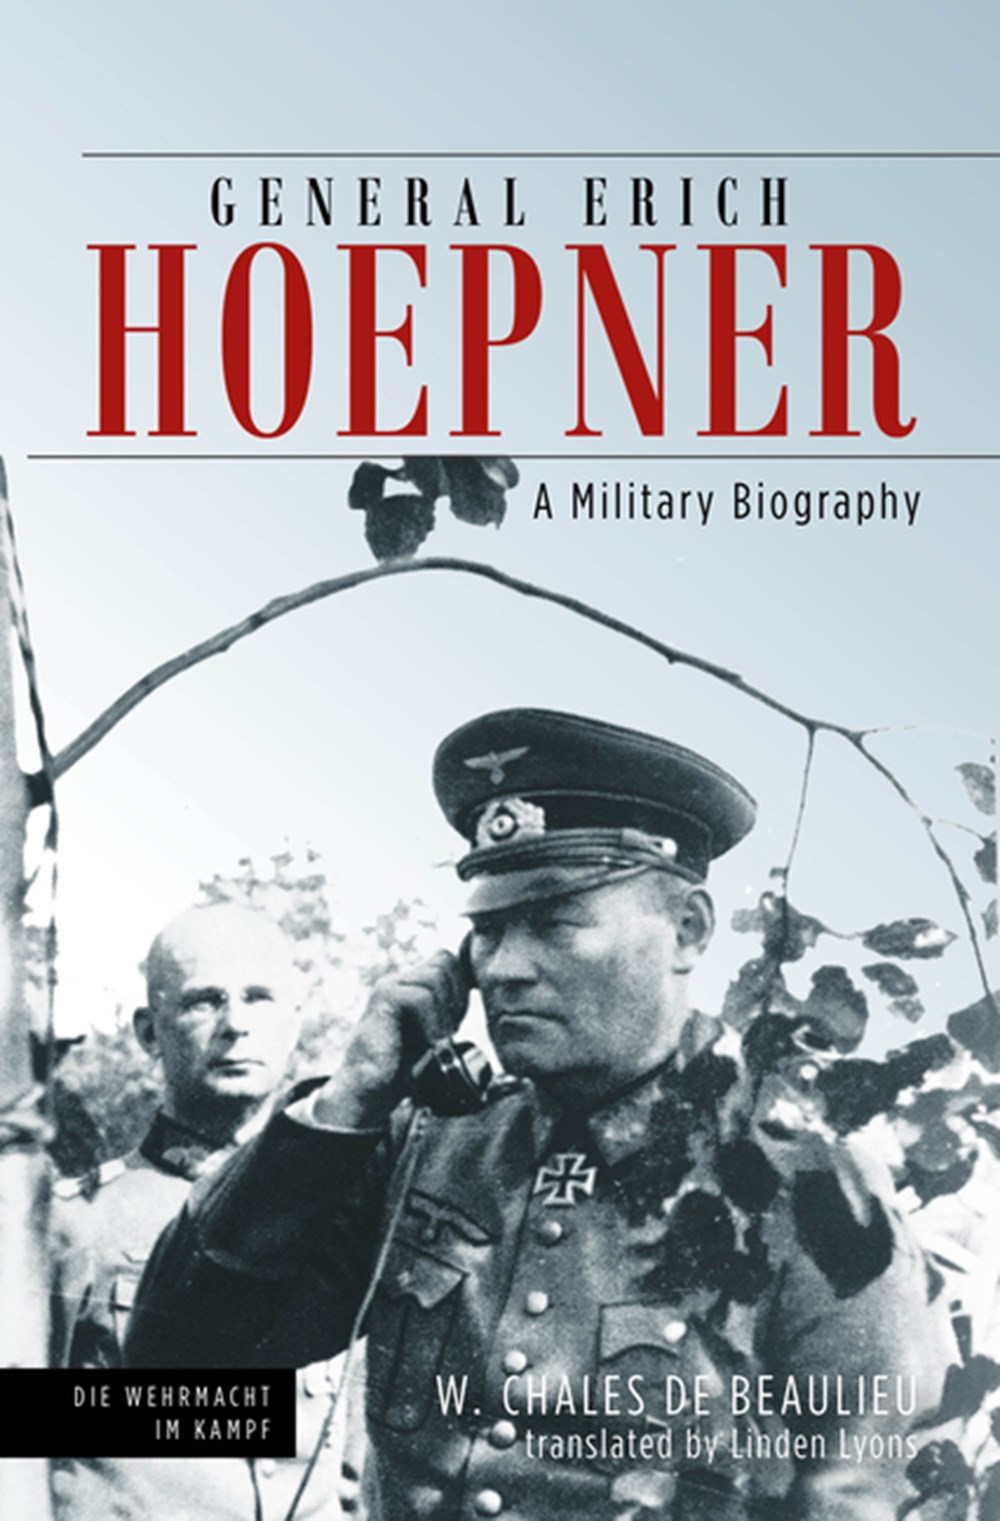 General Erich Hoepner: A Military Biography